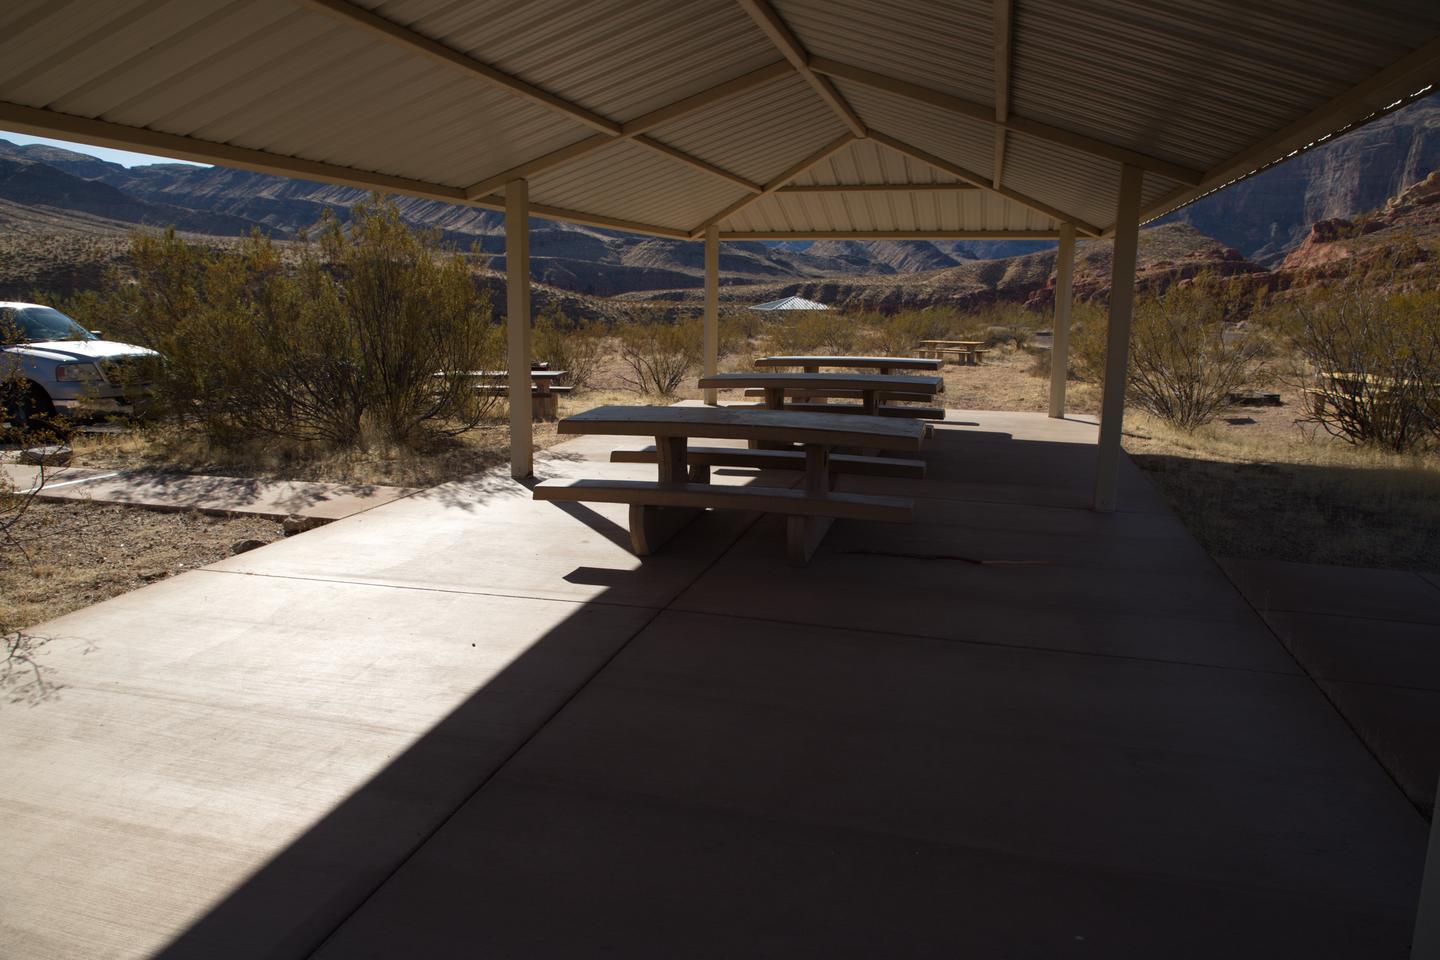 Site 103 shelterSite 103 has a large shelter with 3 picnic tables